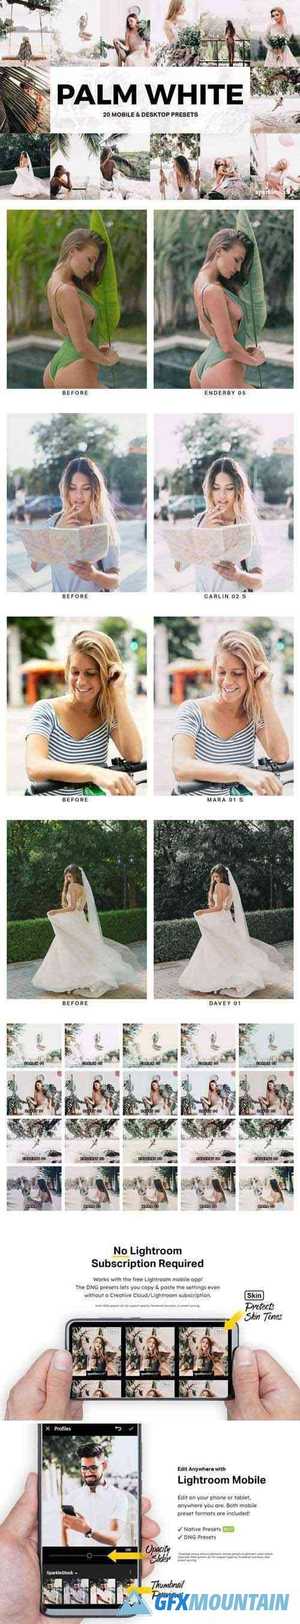 20 Palm White Lightroom Presets and LUTs 600169